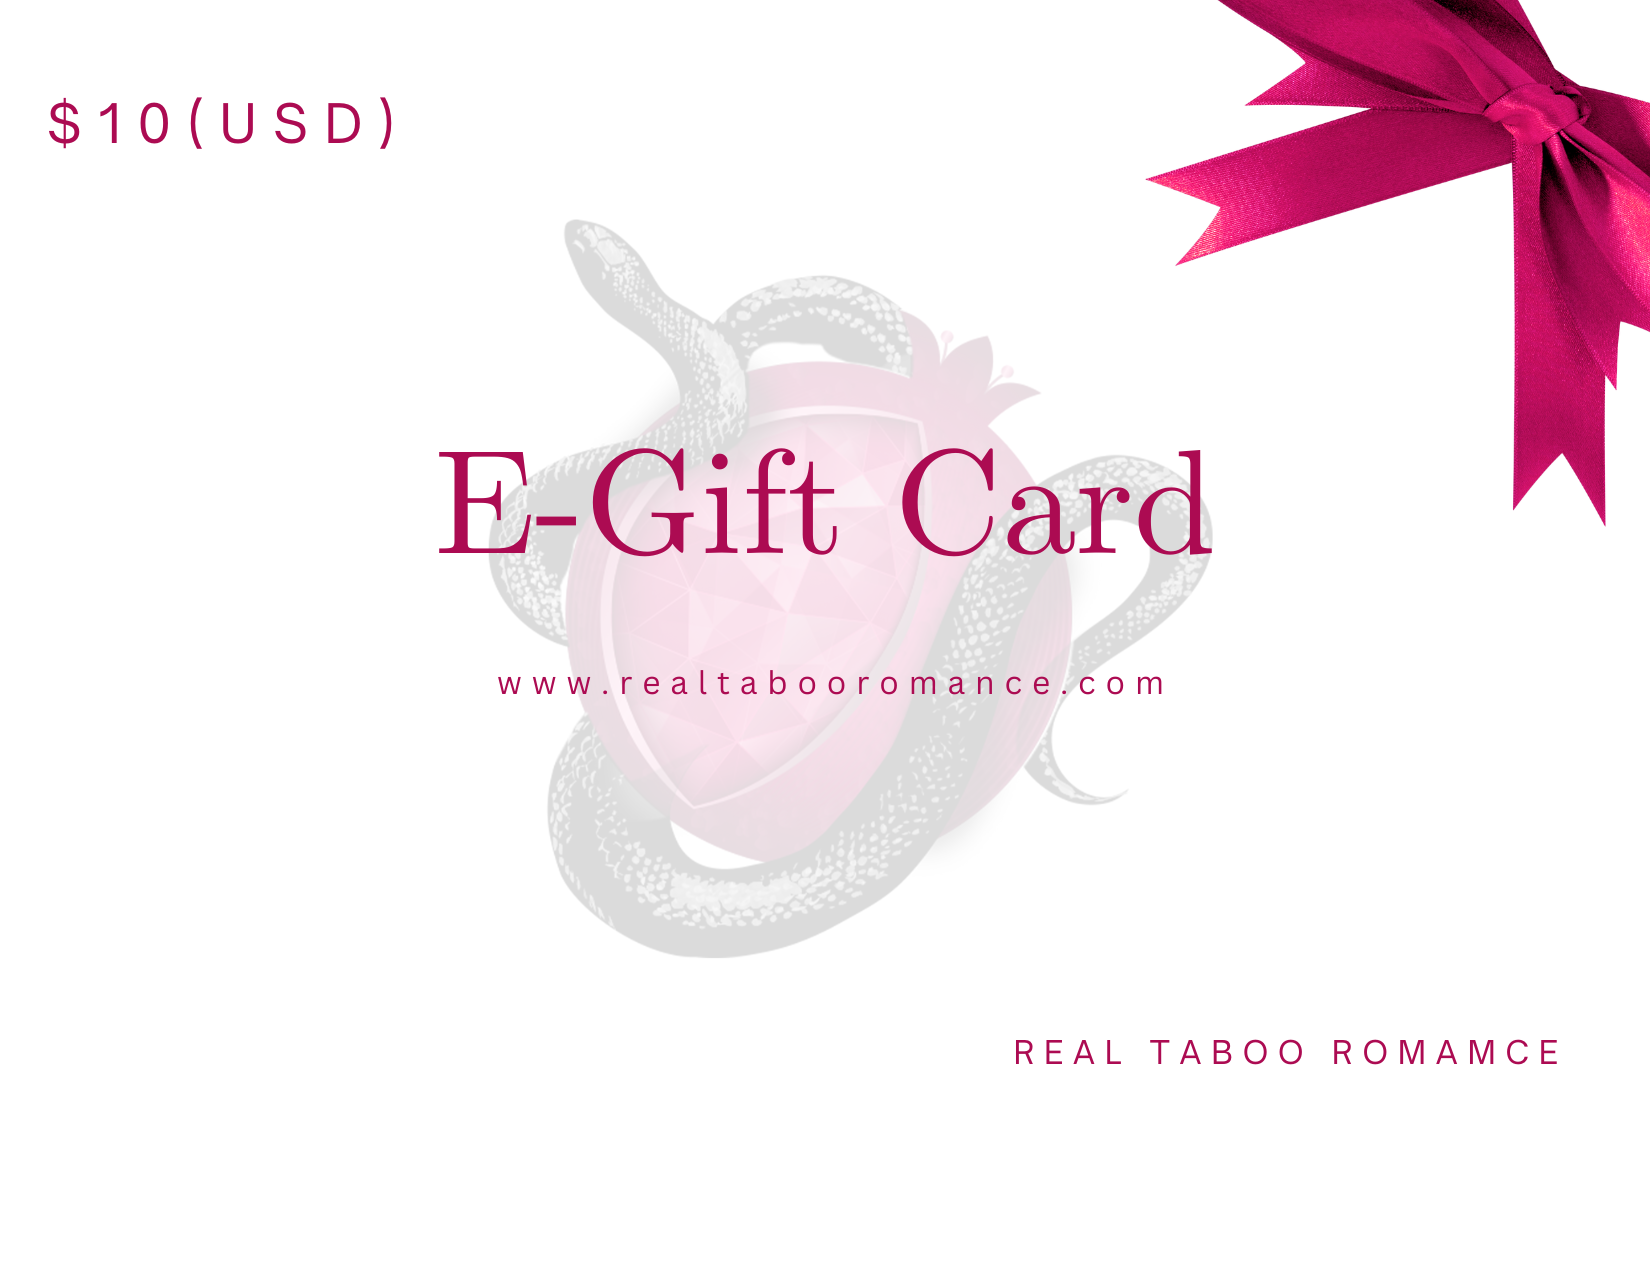 Gift Card Nuuvem 10 reais - Gift Card Online